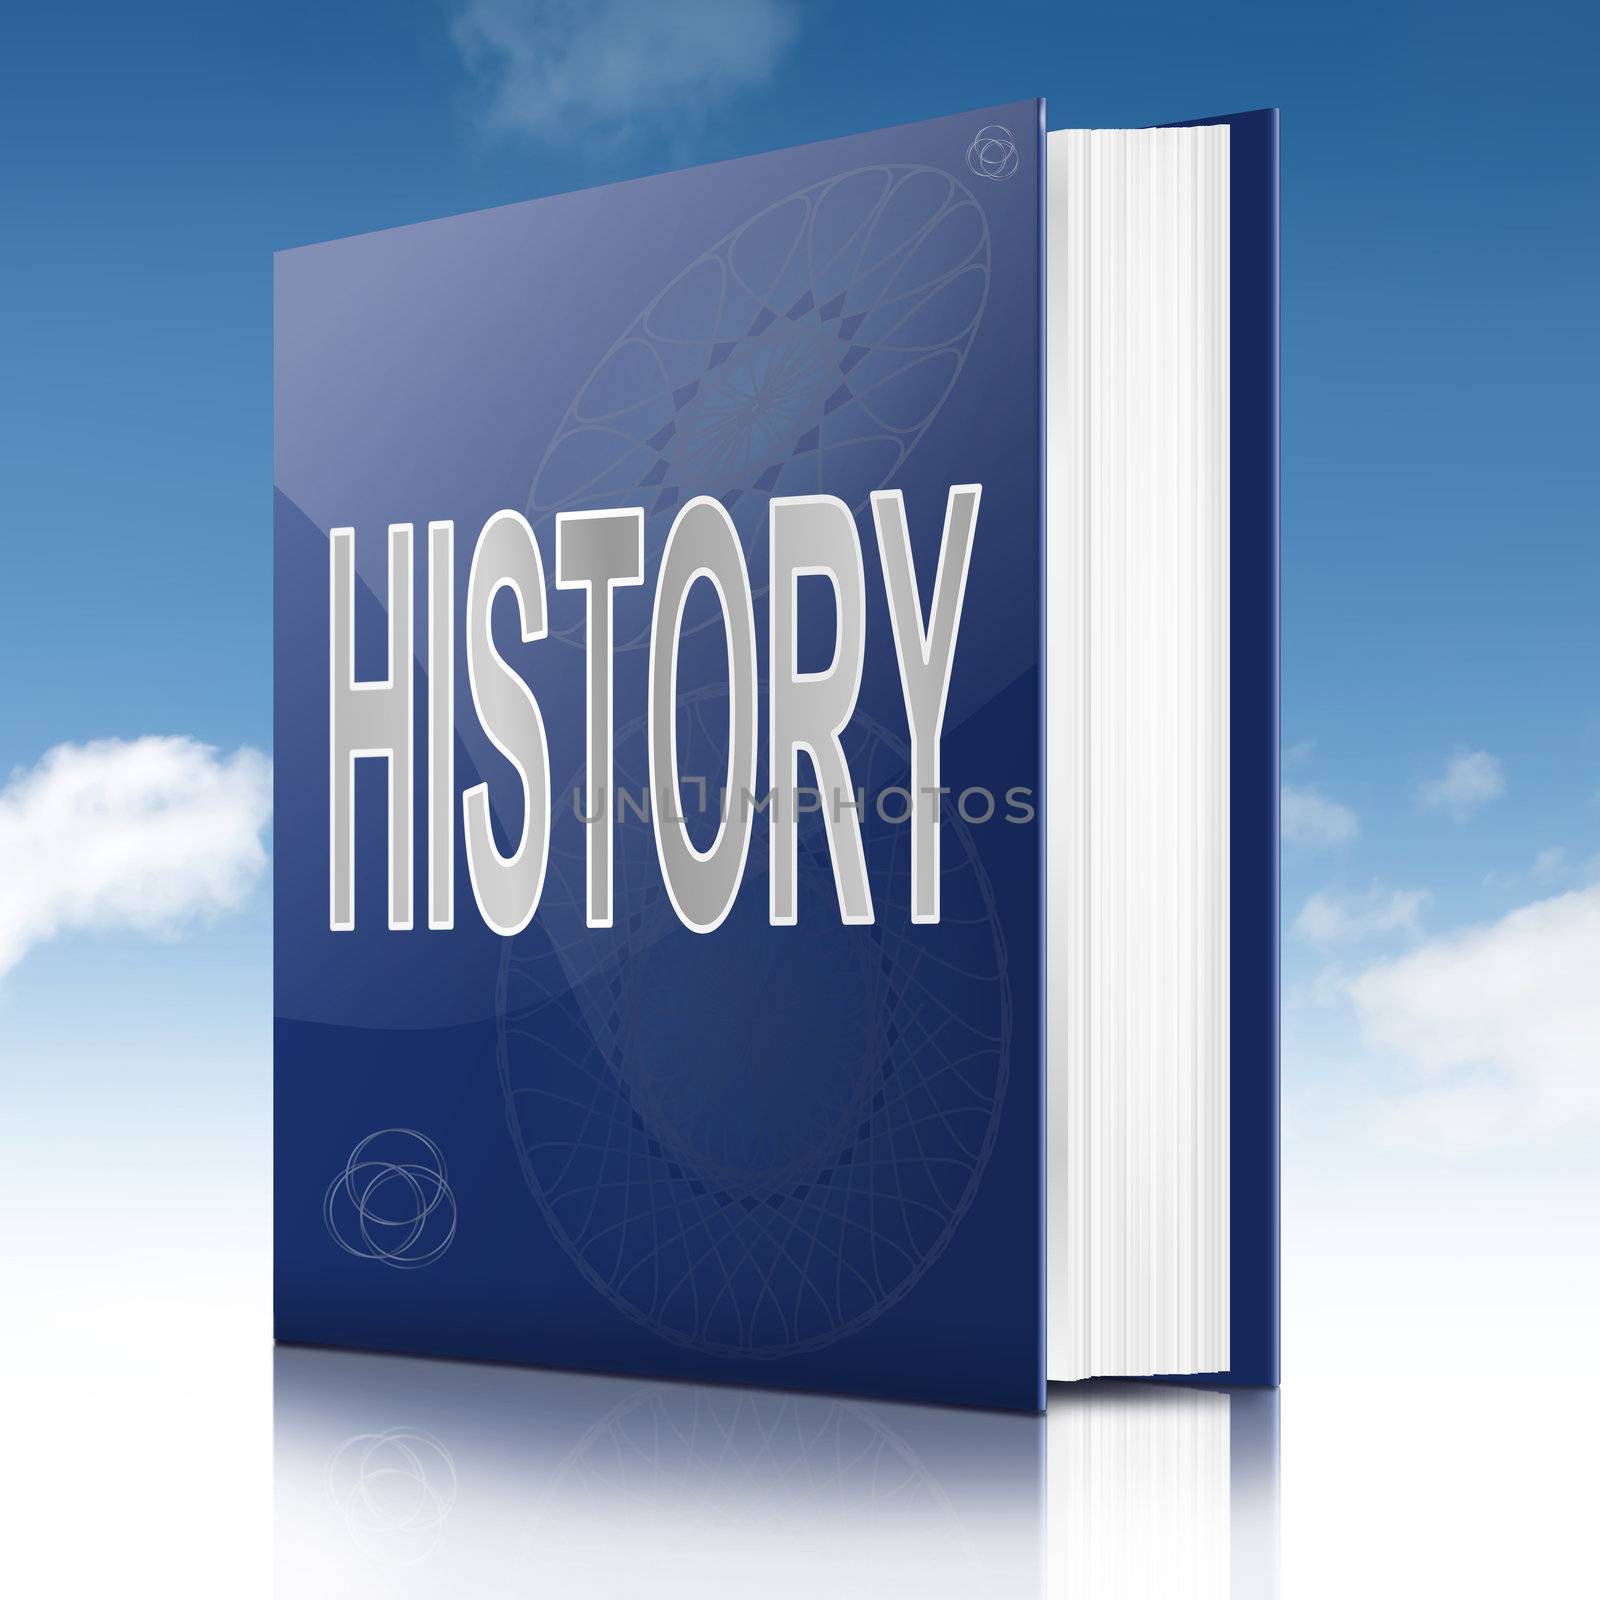 Illustration depicting a text book with a history concept title. White background.